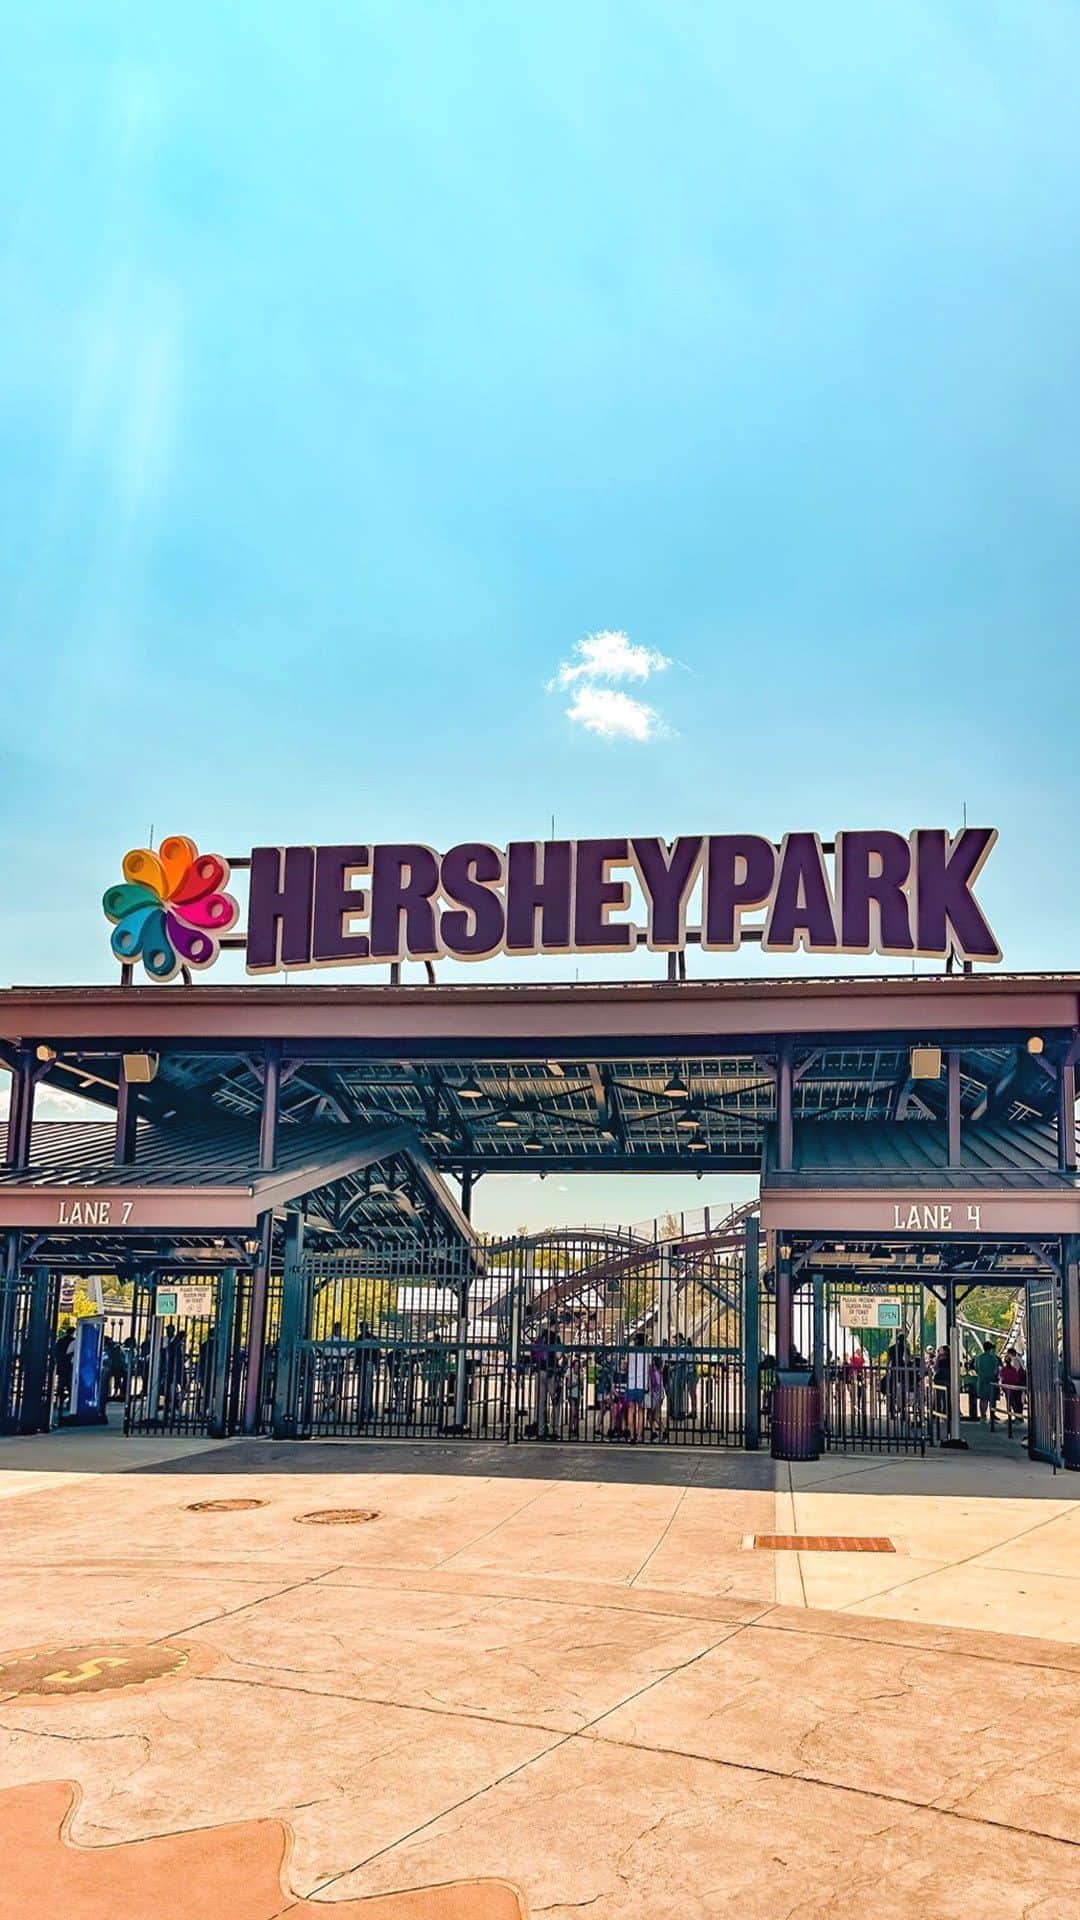 Visit The USAのインスタグラム：「If chocolate and roller coasters are your guilty pleasures, you’ll have a sweet time in Hersheypark. 🍫🎢  Save these tips to fully experience the magic:  🚗Plan a 2-hour drive from Philadelphia, Pennsylvania.  🎢Ride the Candymonium, the park’s most epic roller coaster.  🍫Enjoy a chocolate-filled dining experience at The Chocolatier restaurant.   👻For after-hours Halloween chills, check out Dark Nights at Hersheypark every weekend from September 15 - October 29.   🎅Get in the holiday spirit during the Hersheypark Christmas Candylane festivities from November 10 - January 1.  🎥: @pustika_samaddar  #VisitTheUSA #VisitPA #HersheyparkHappy #AdrenalineRush」